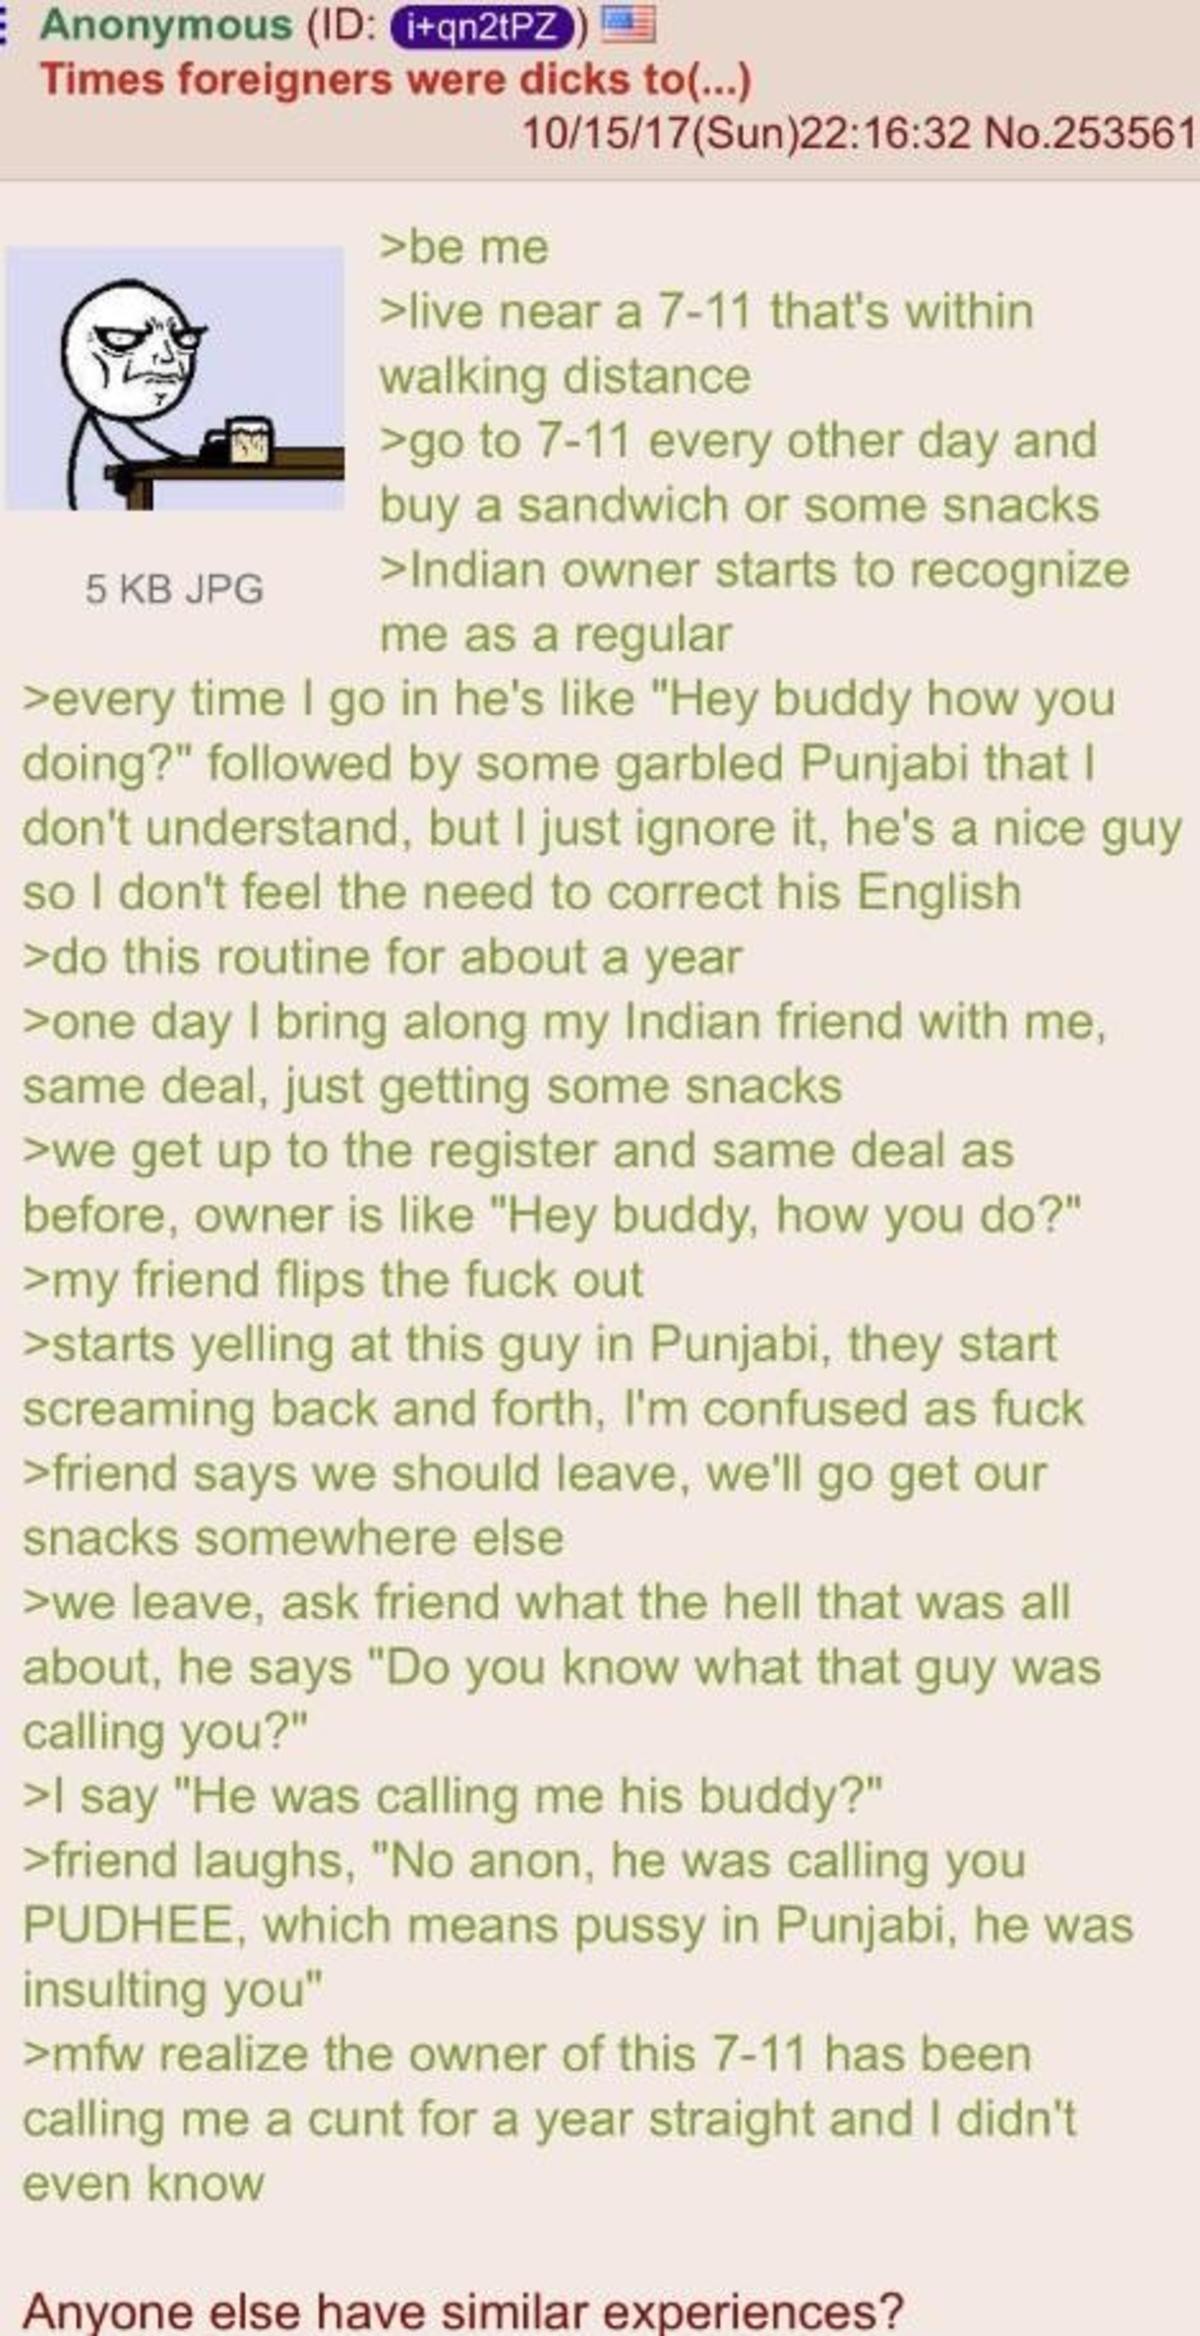 punjabi 4chan - Anonymous Id iqn2tPZ Times foreigners were dicks to... 101517Sun32 No.253561 >be me >live near a 711 that's within walking distance >go to 711 every other day and buy a sandwich or some snacks 5 Kb Jpg >Indian owner starts to recognize me 